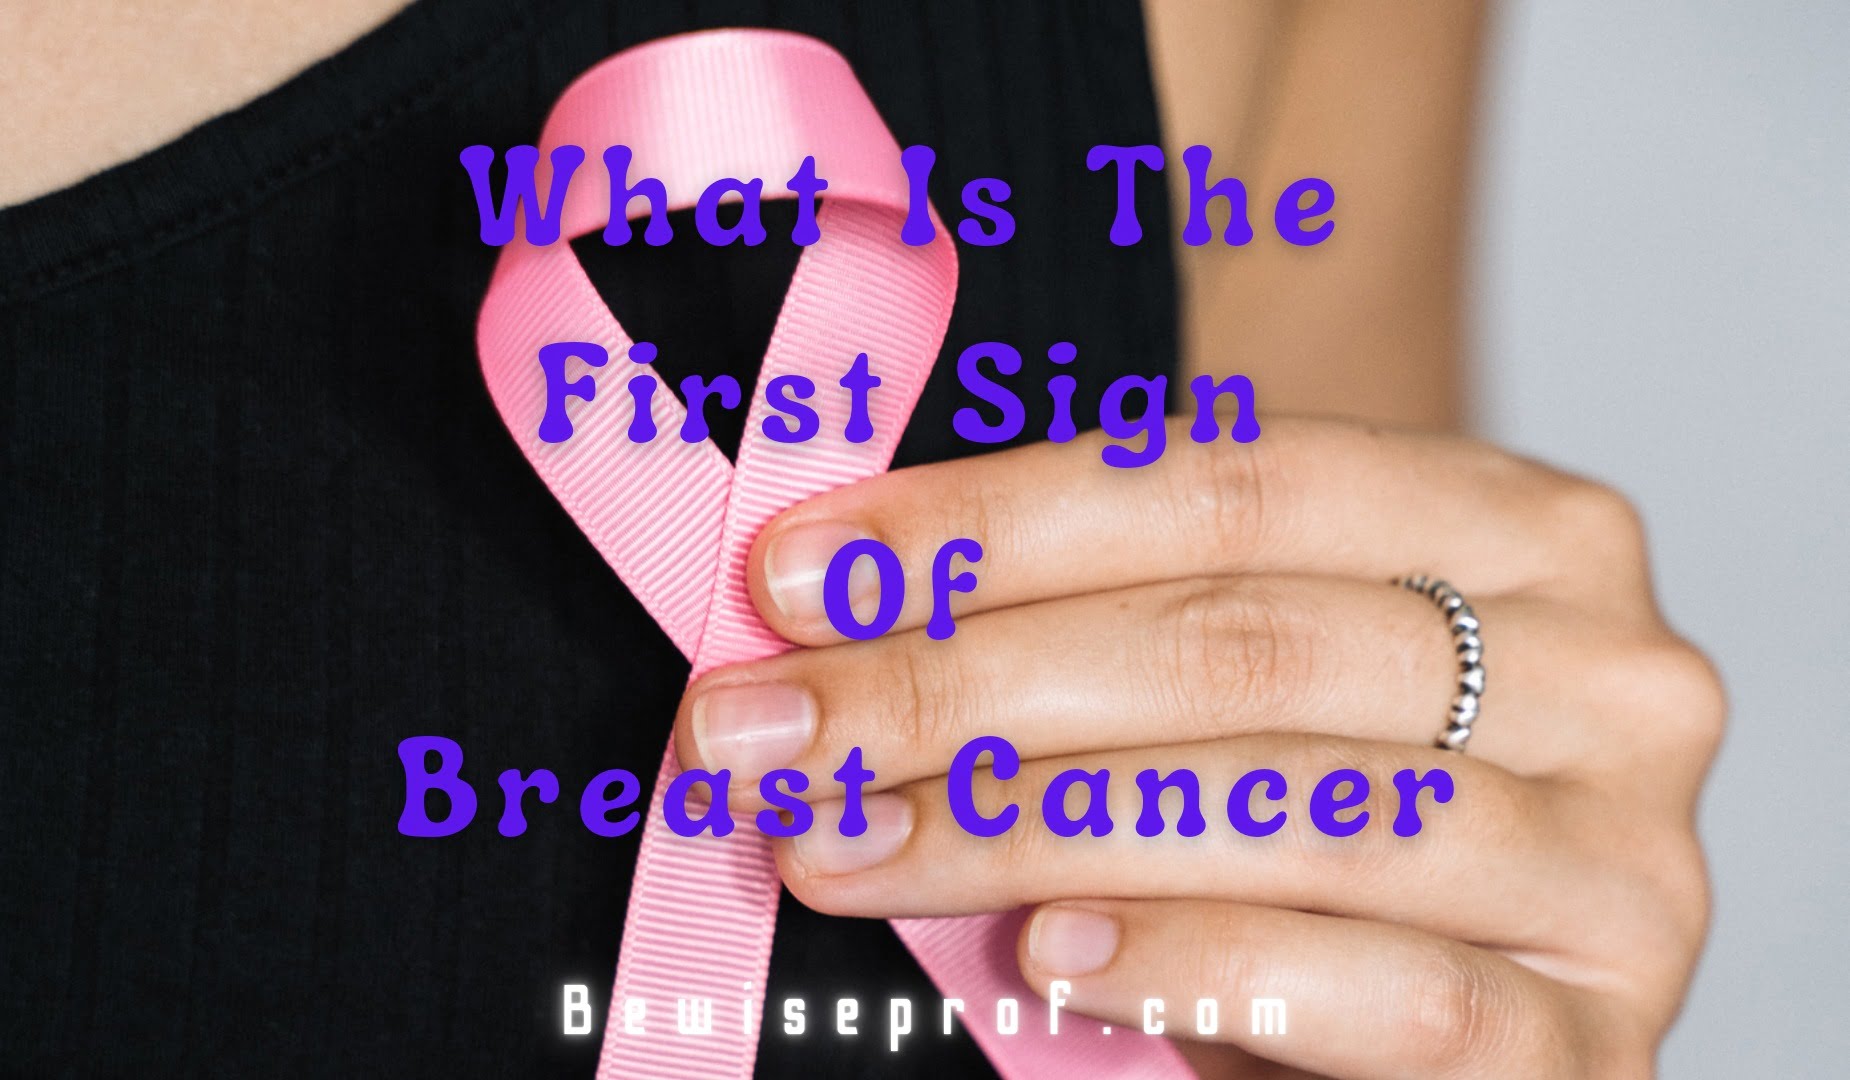 What Is The First Sign Of Breast Cancer